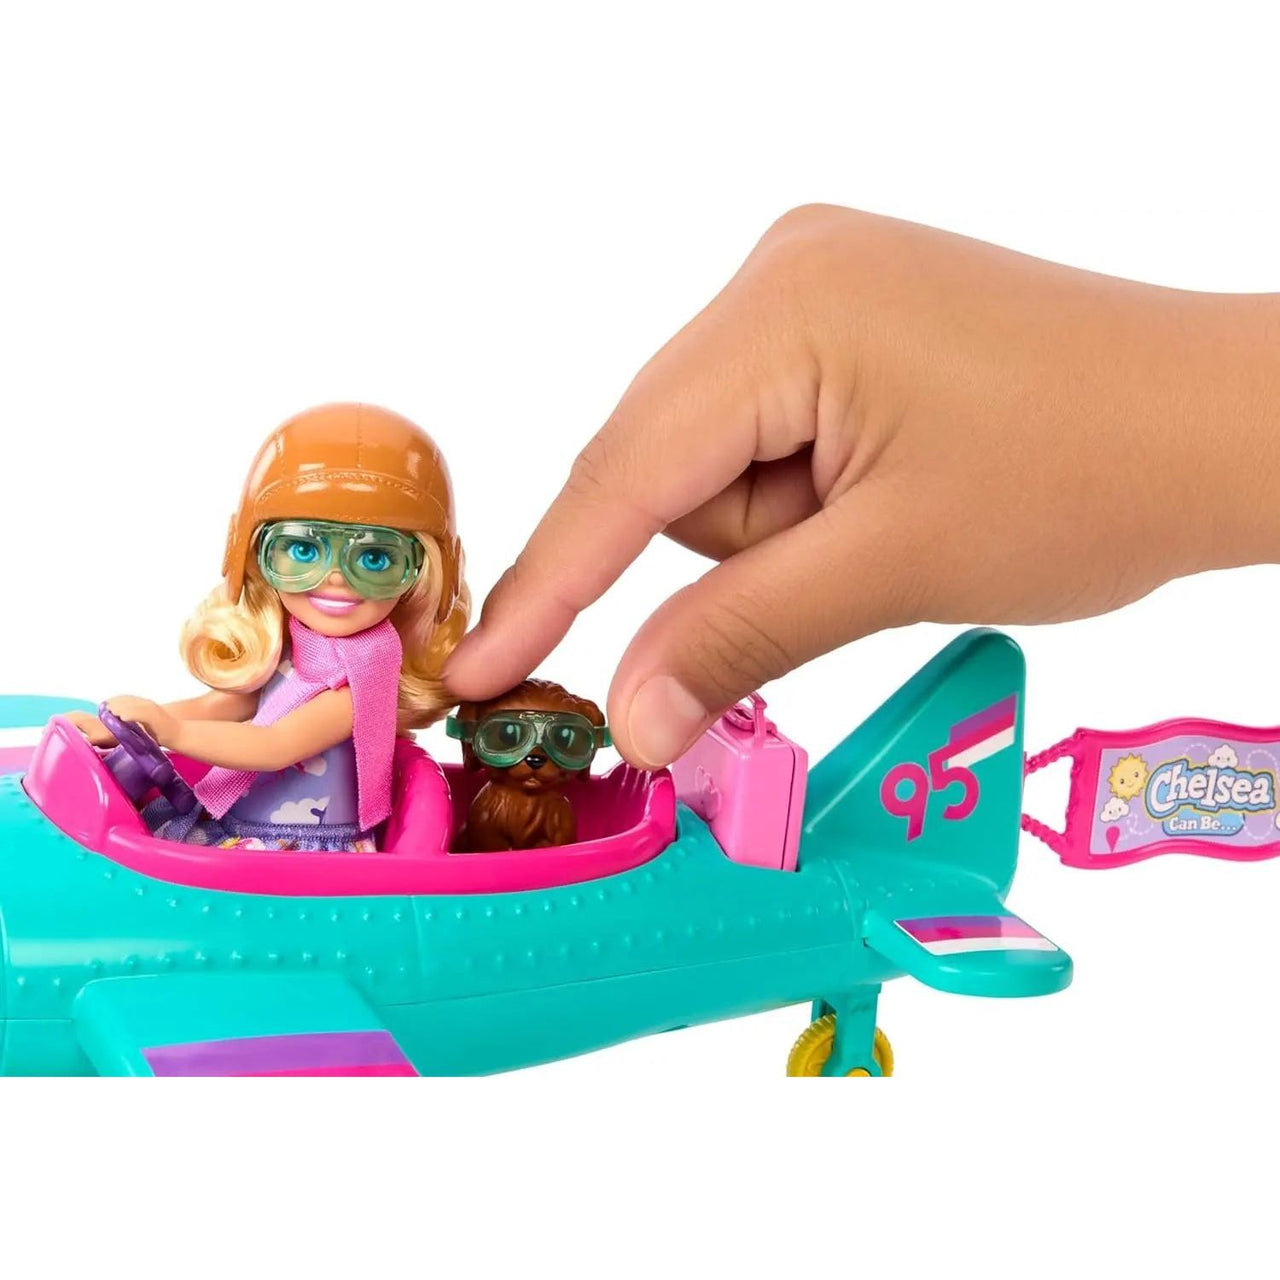 Barbie Chelsea Can Be Doll & Plane Playset Barbie